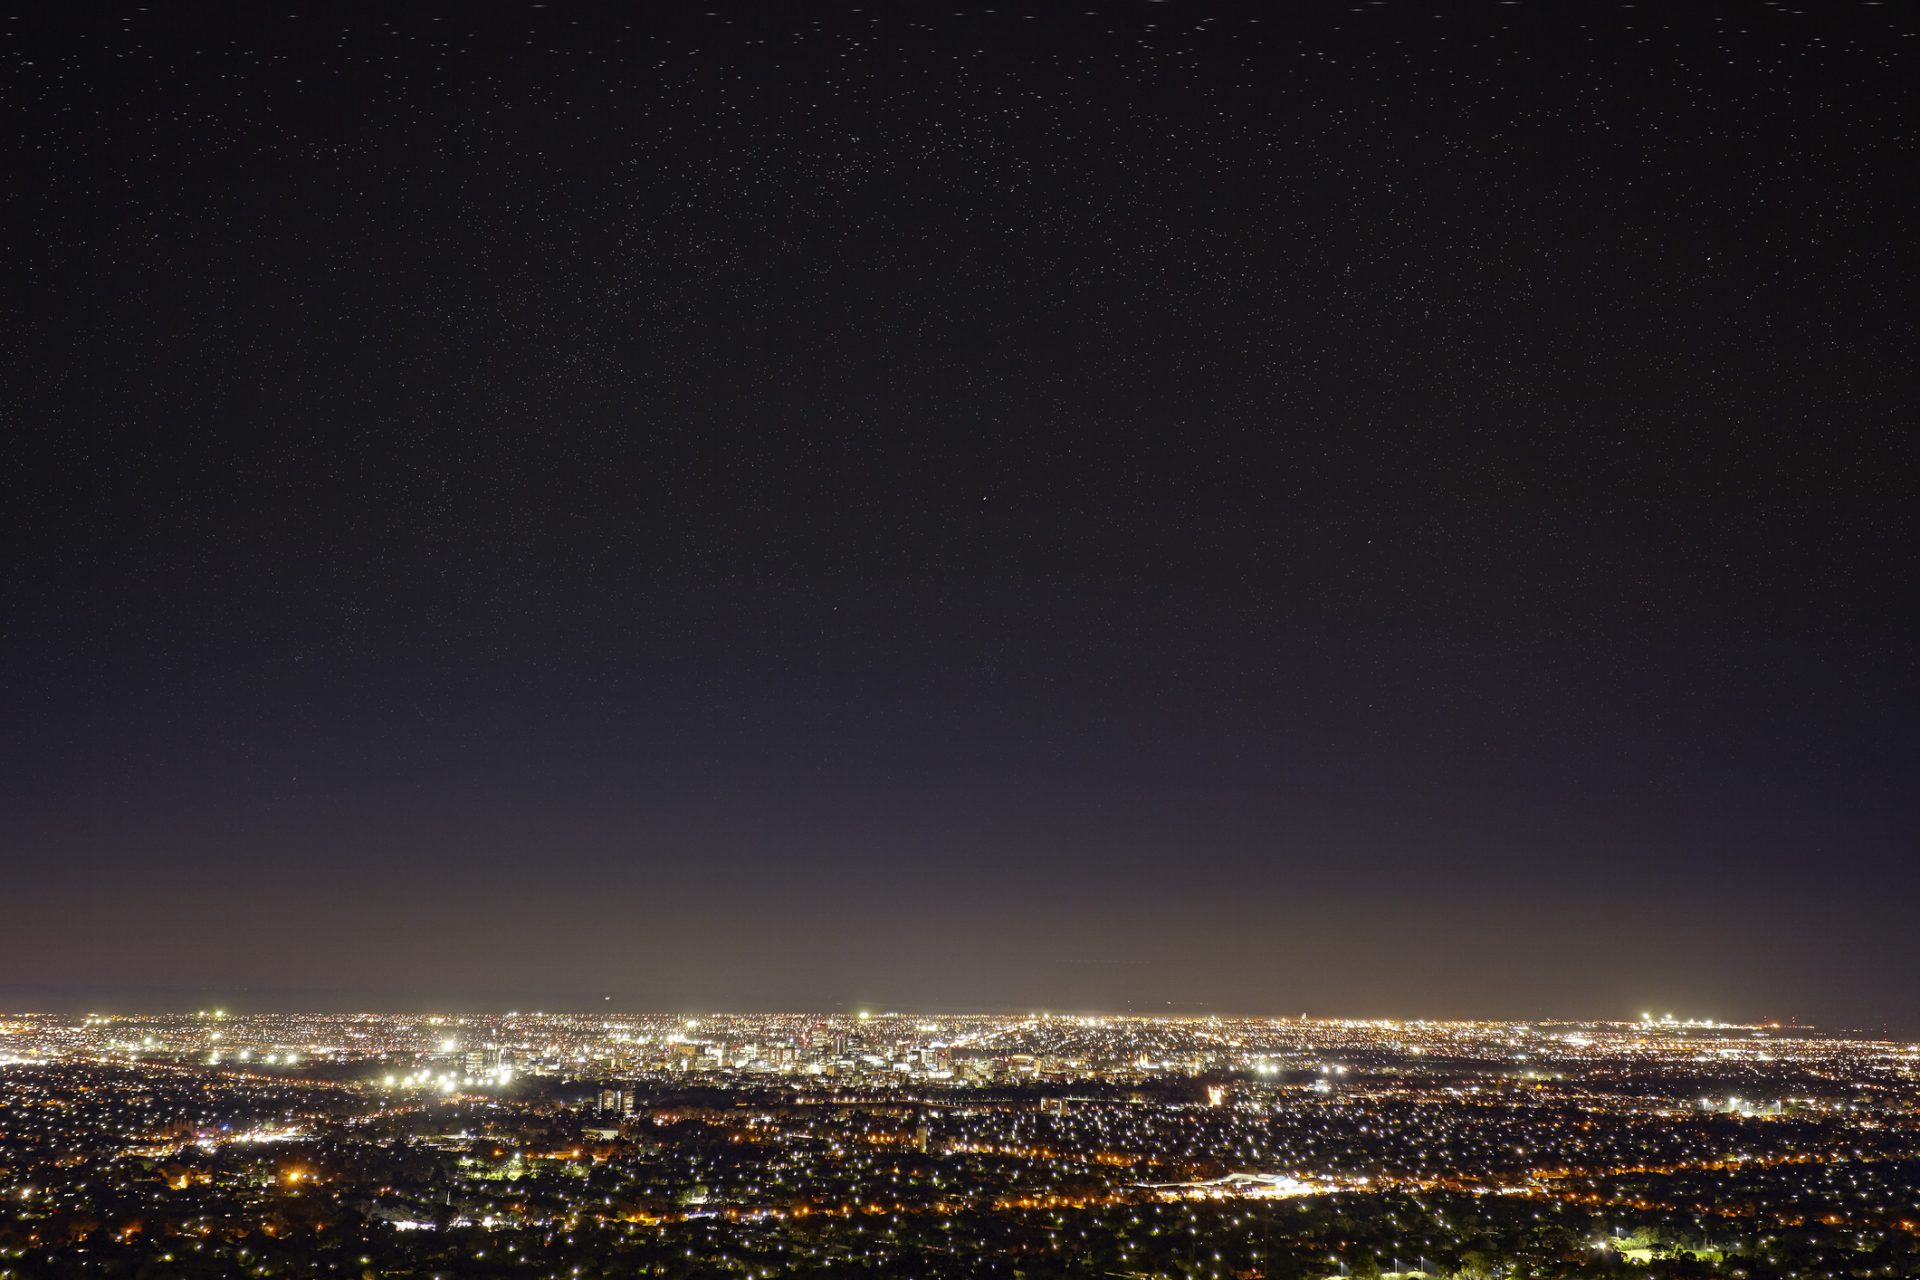 No more starry nights? Light pollution is changing our skies